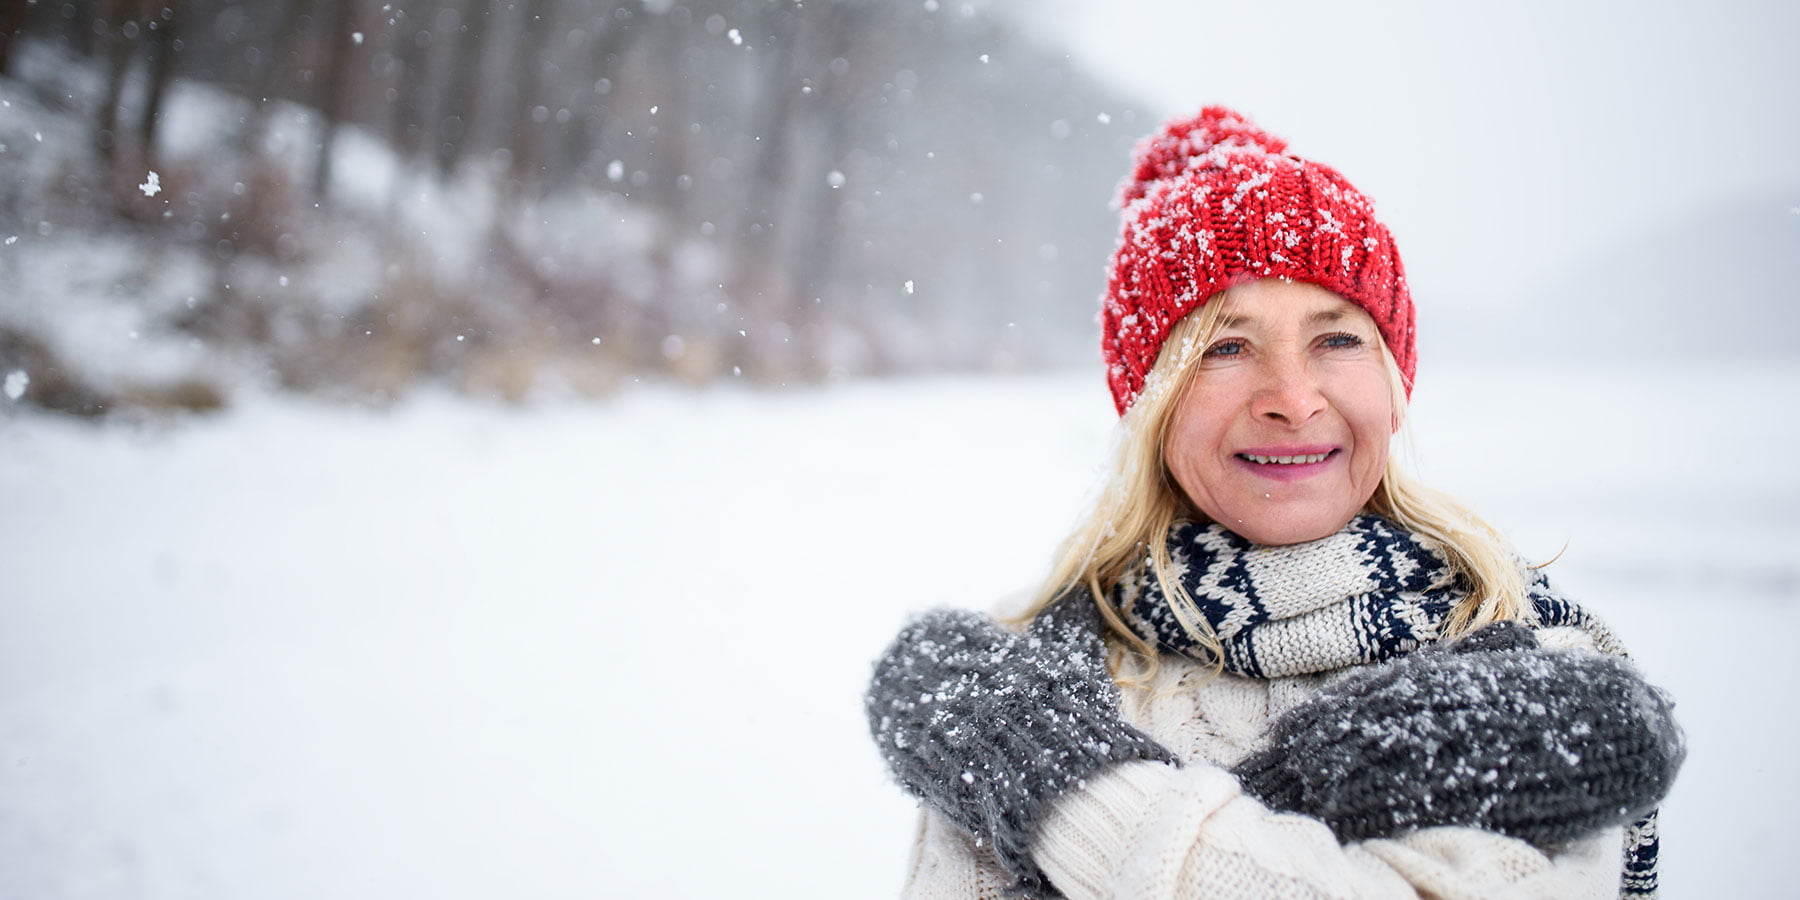 Dental Issues with Teeth in Winter